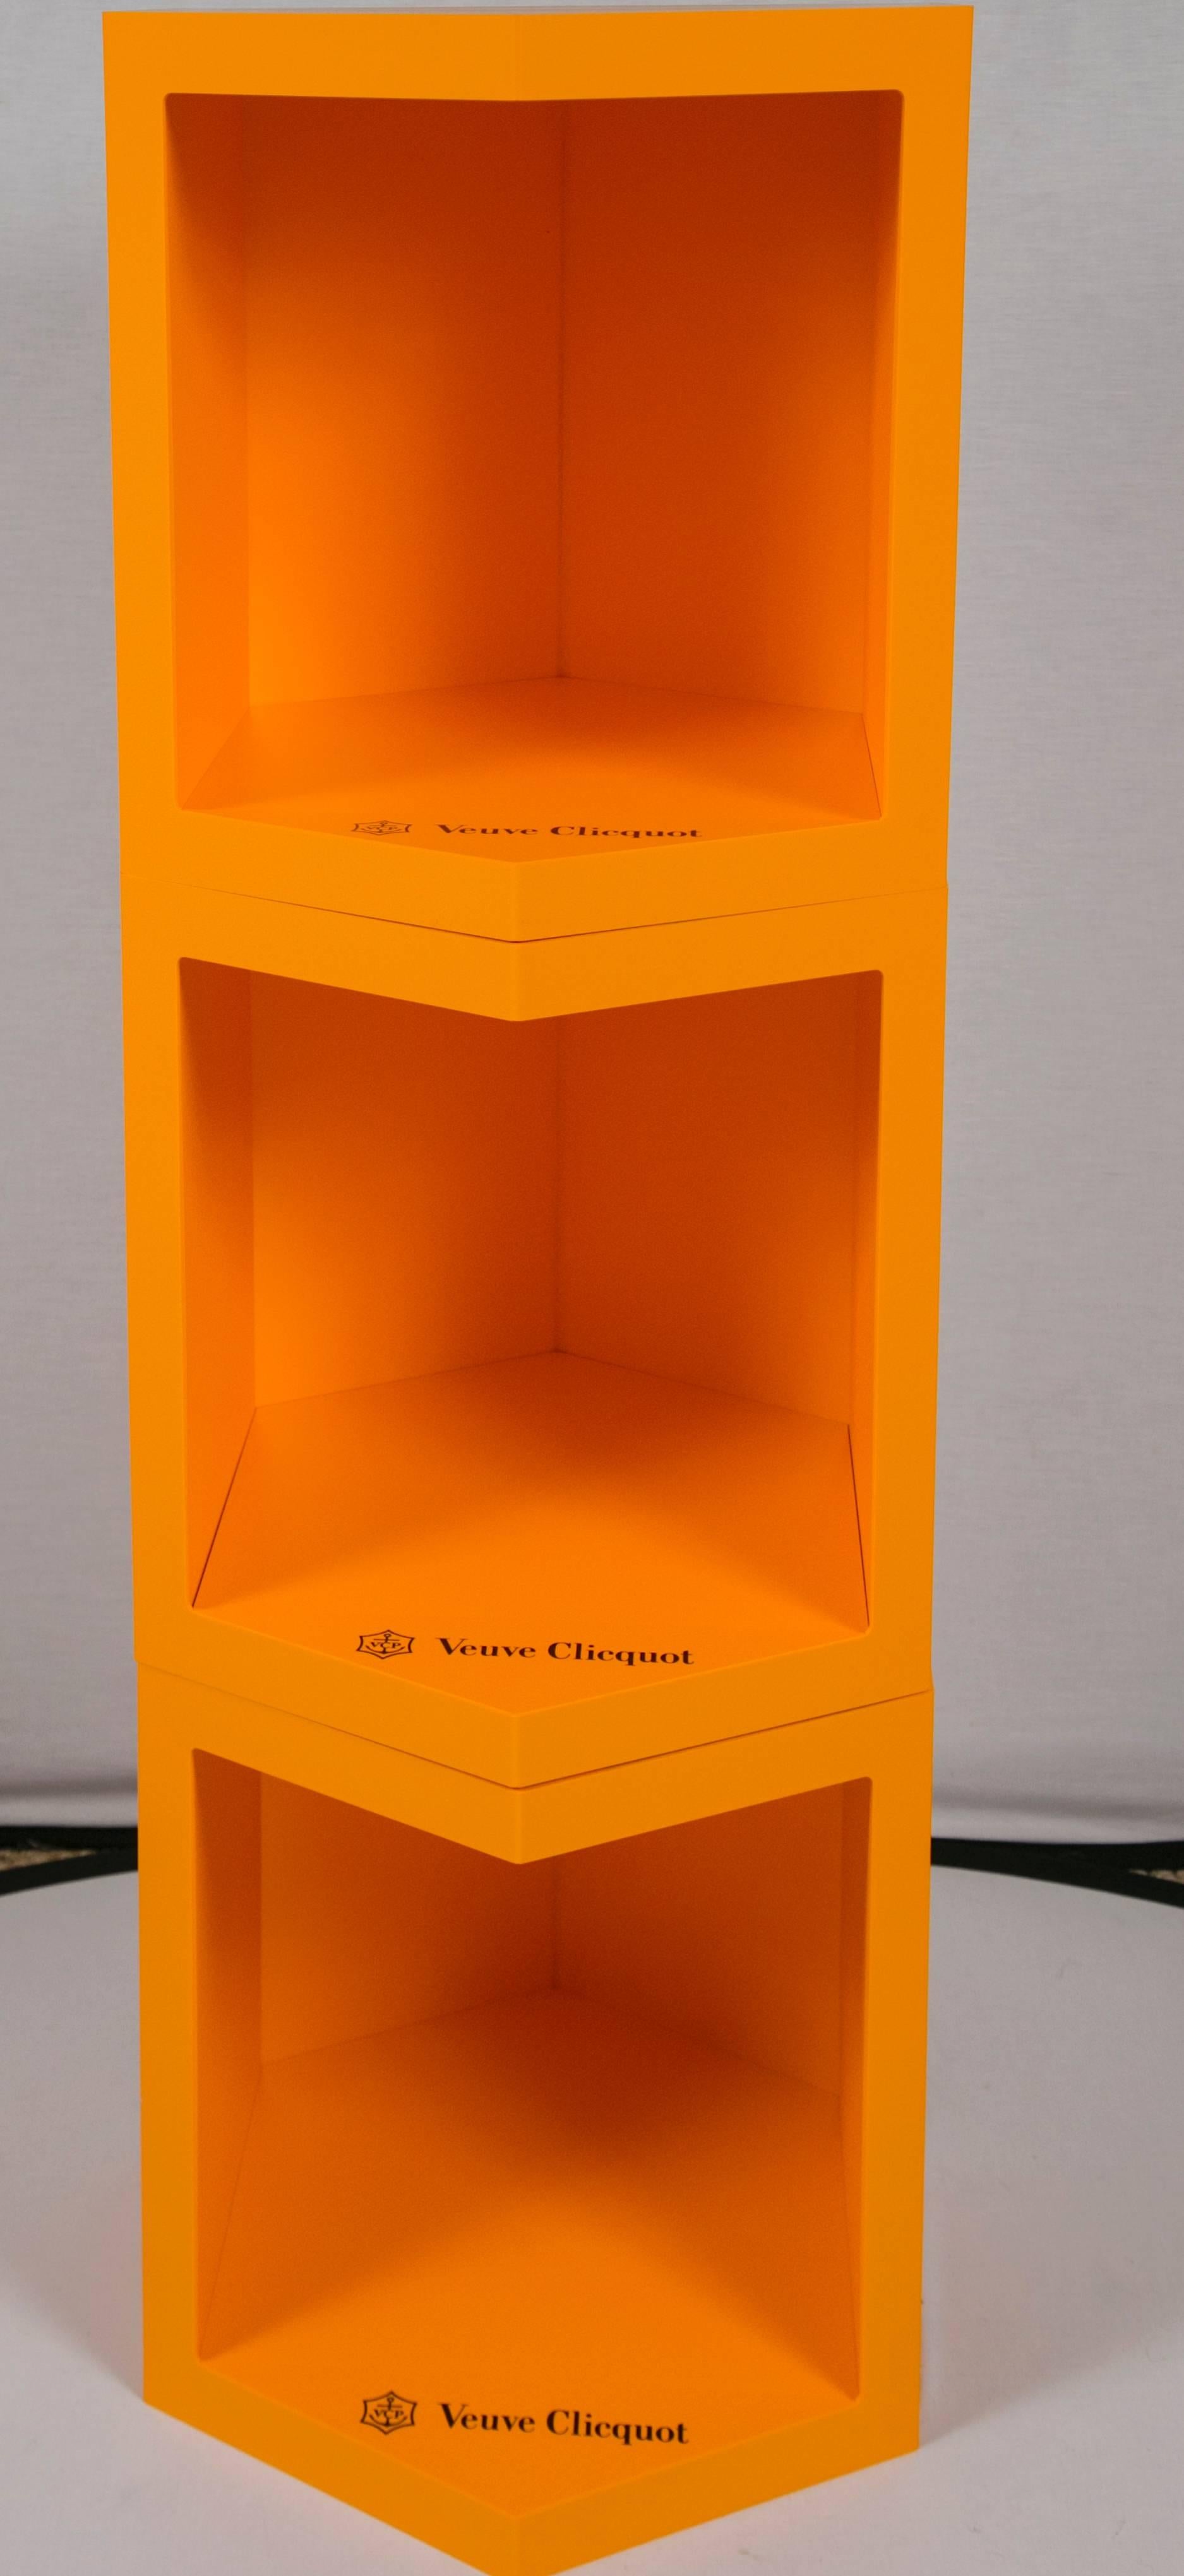 Brand new Veuve Clicquot promotional display boxes are the perfect playful addition to any home. They are a color burst that cannot be resisted (champagne not included, our apologies). 

Sold as a set of three for $425 each, making the perfect